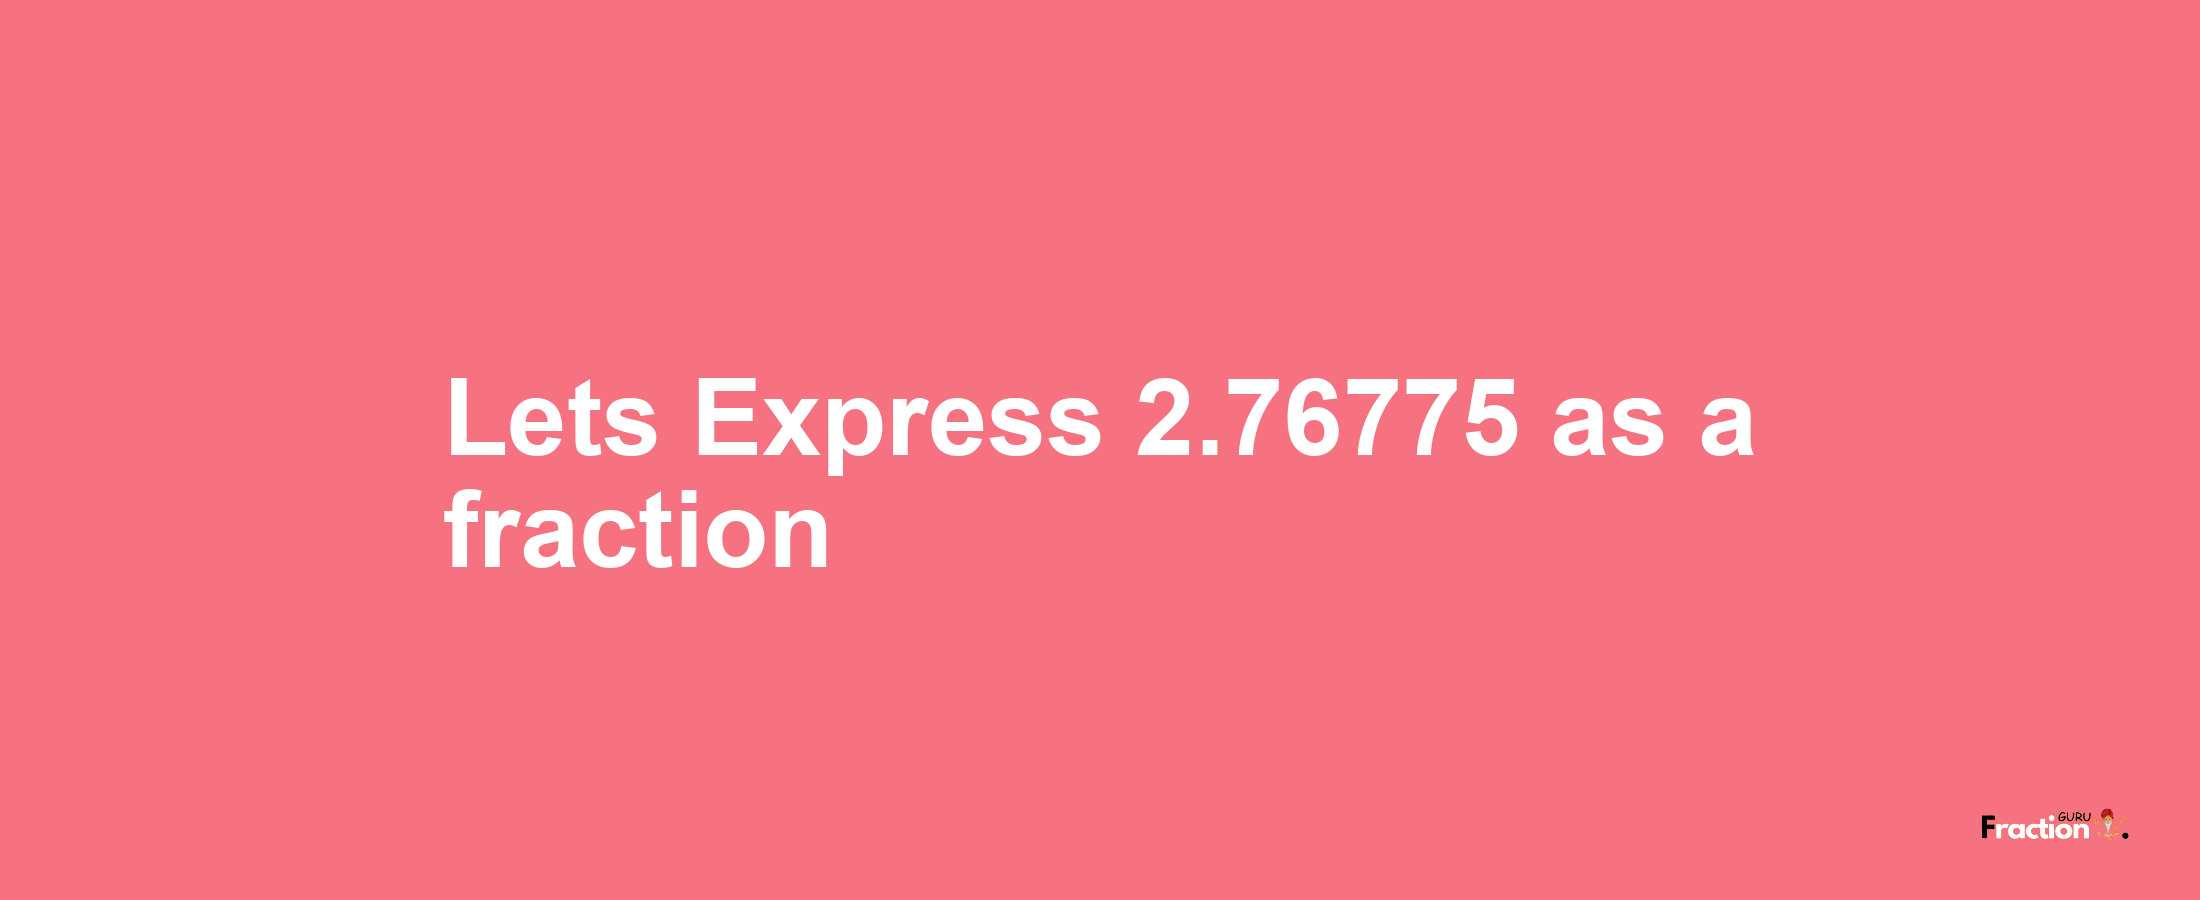 Lets Express 2.76775 as afraction